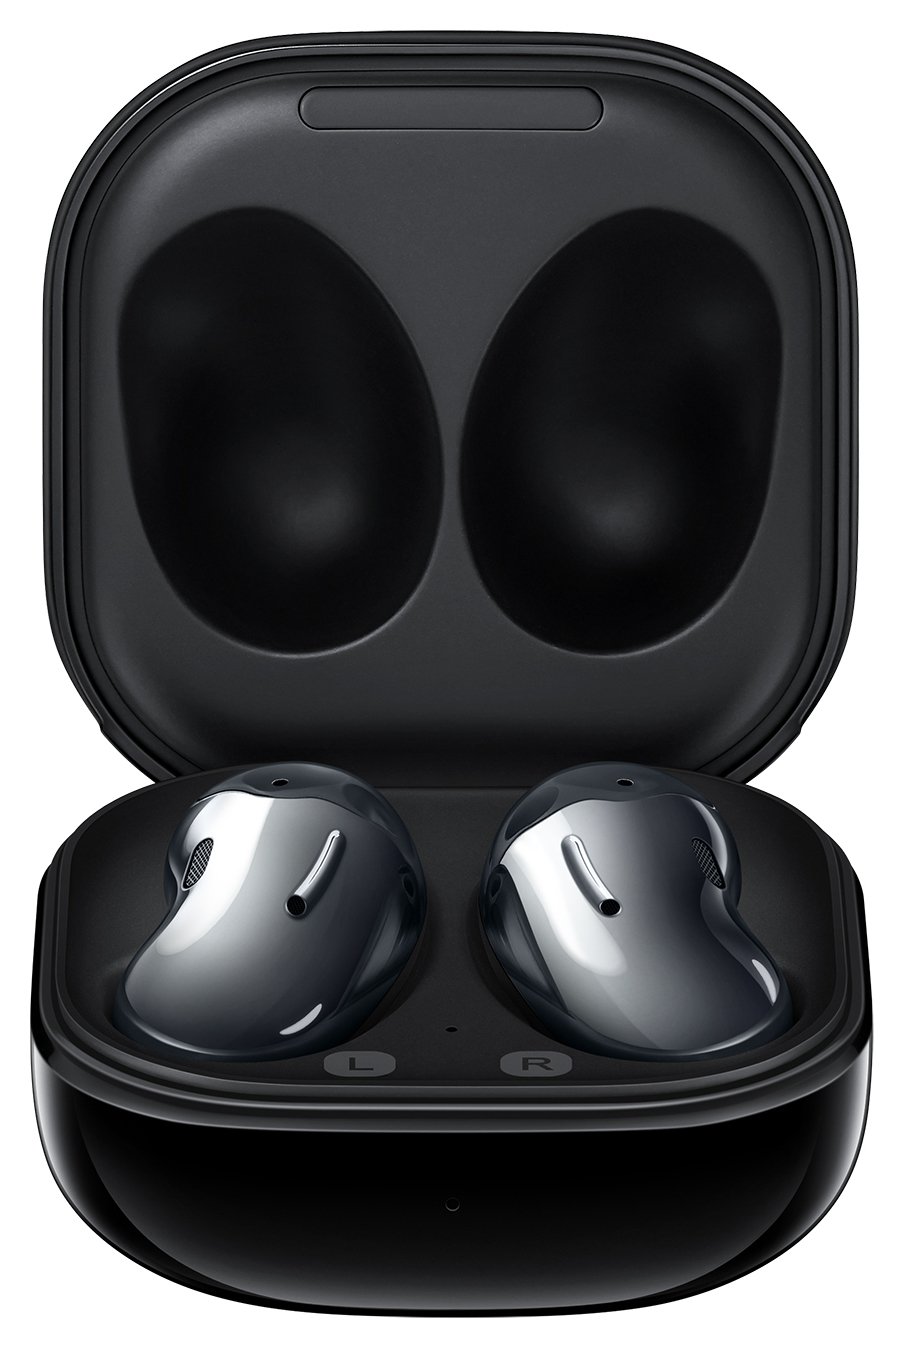 Samsung Galaxy Buds Live vs Apple AirPods Pro: which is better